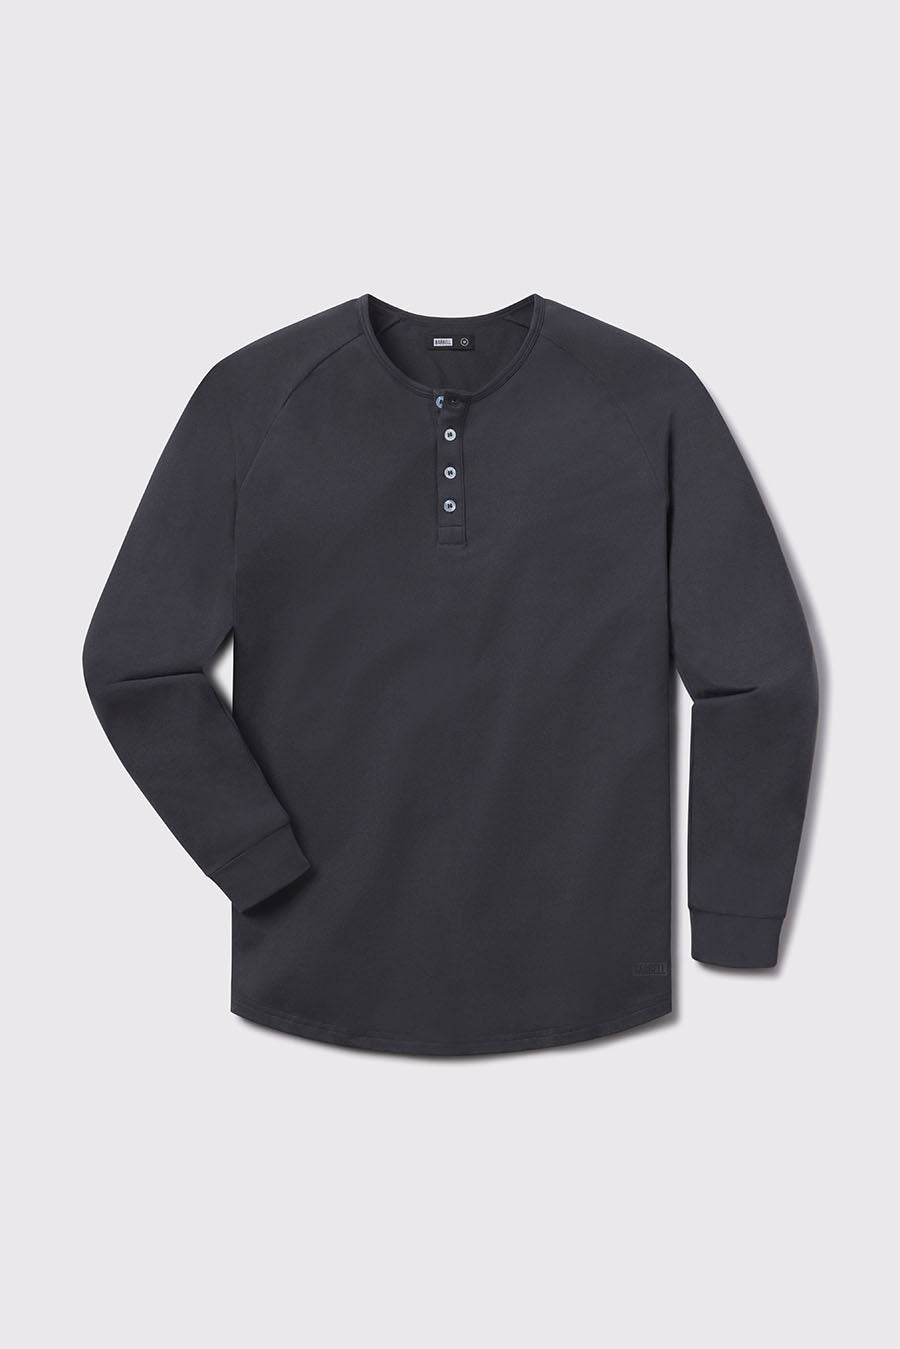 Scout Henley -Charcoal - photo from front flat lay #color_charcoal